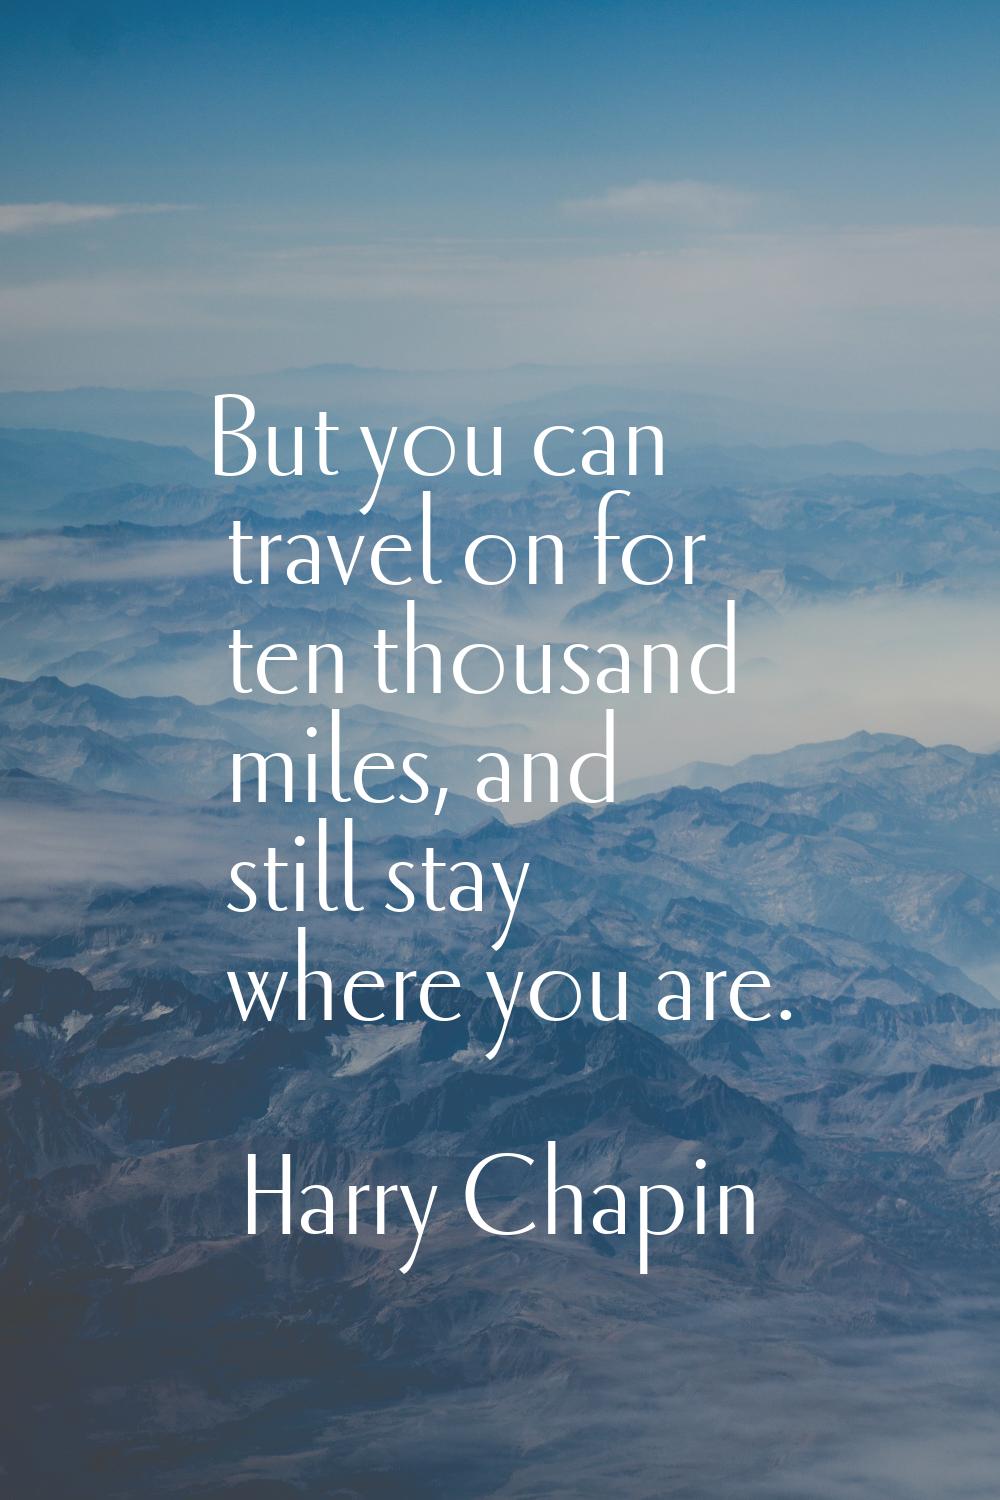 But you can travel on for ten thousand miles, and still stay where you are.